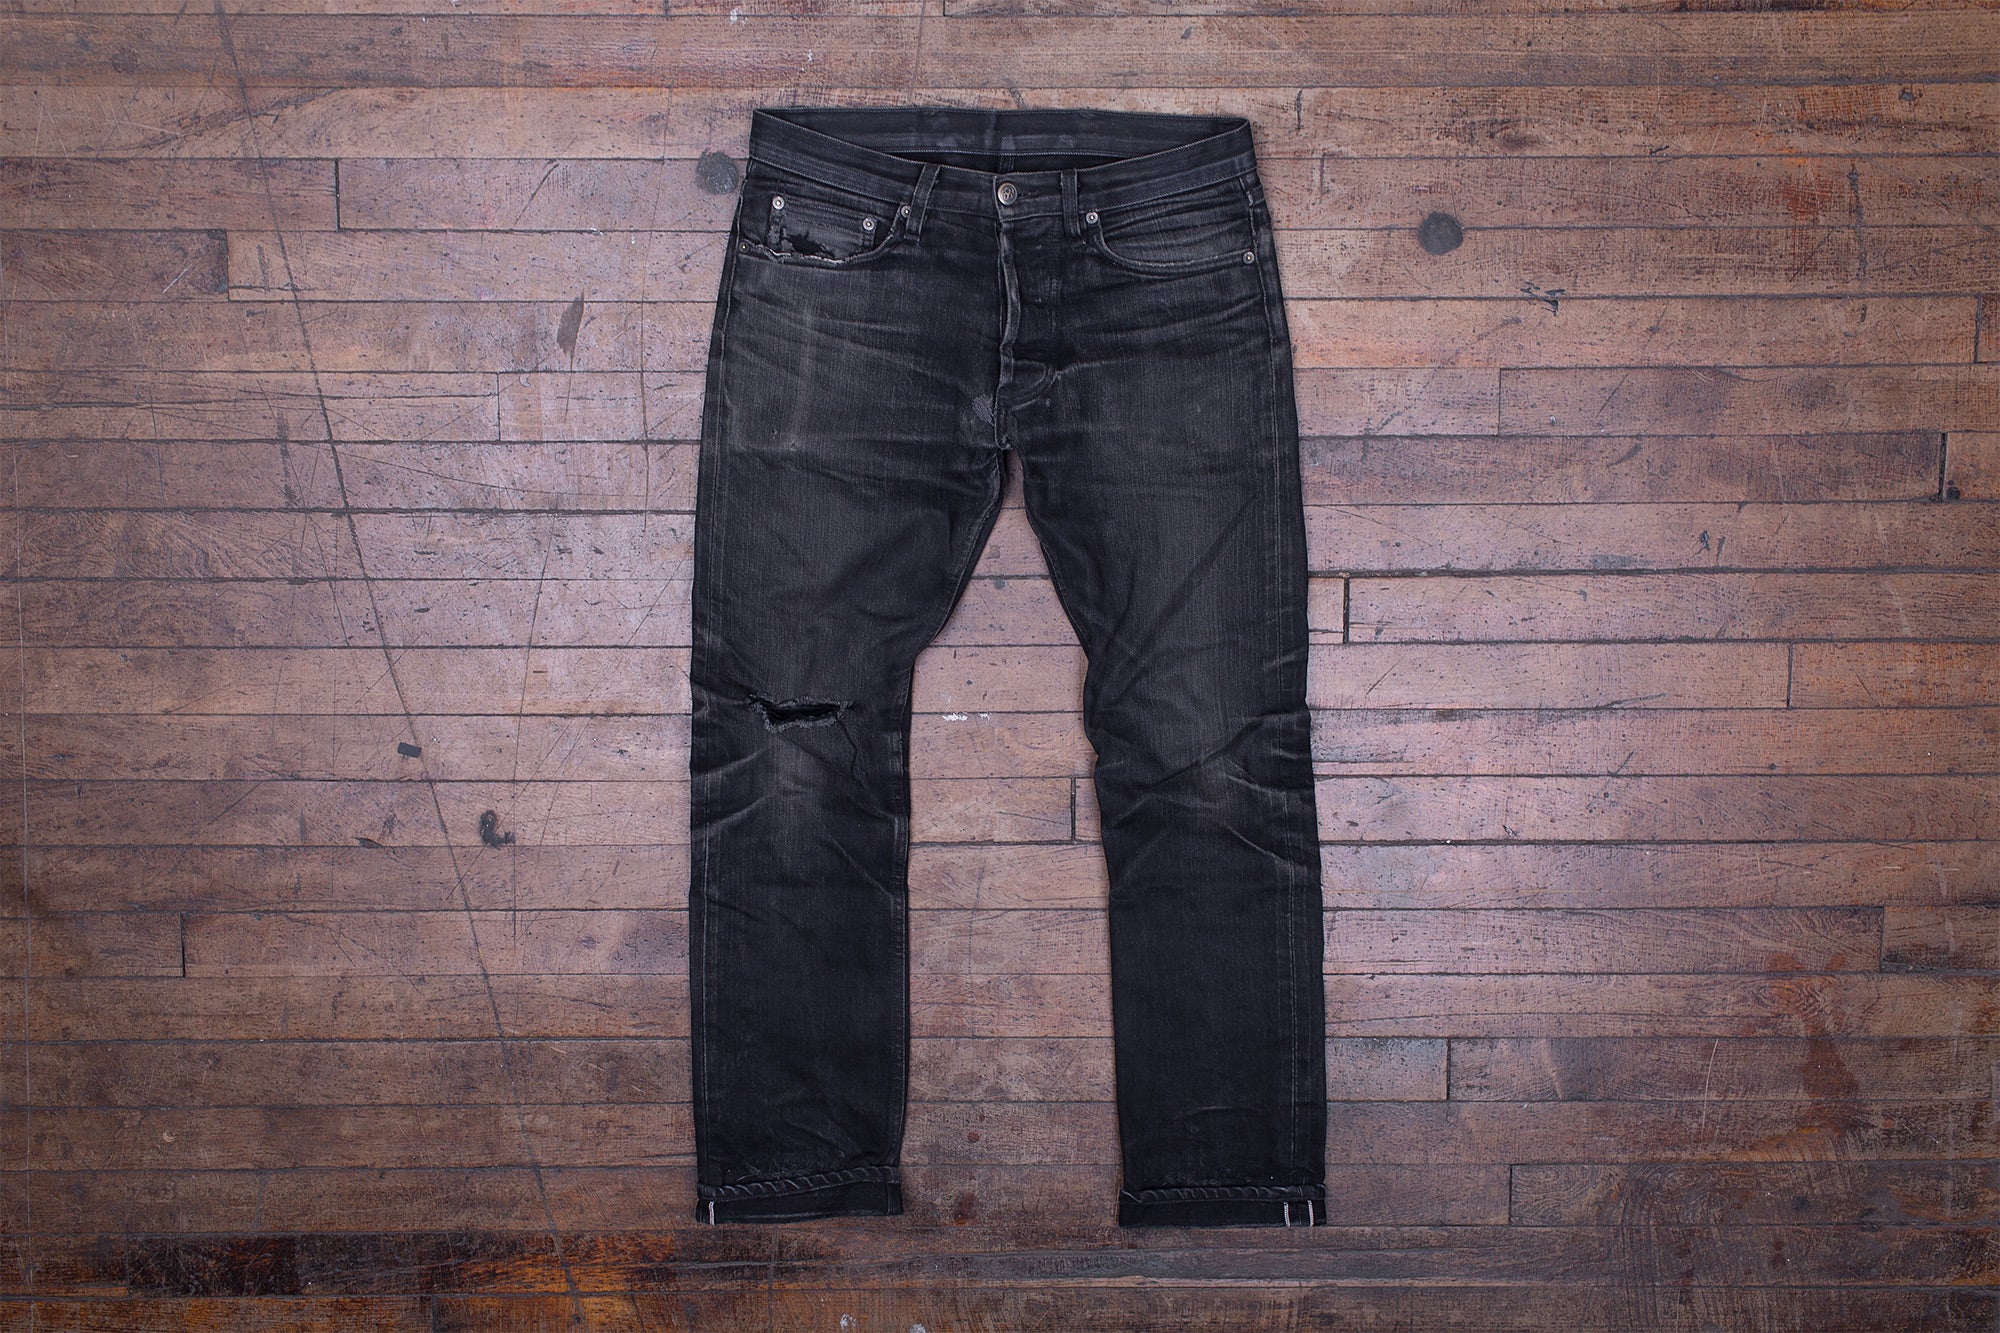 Front photo of a pair of worn-in black jeans laying on a wooden floor.